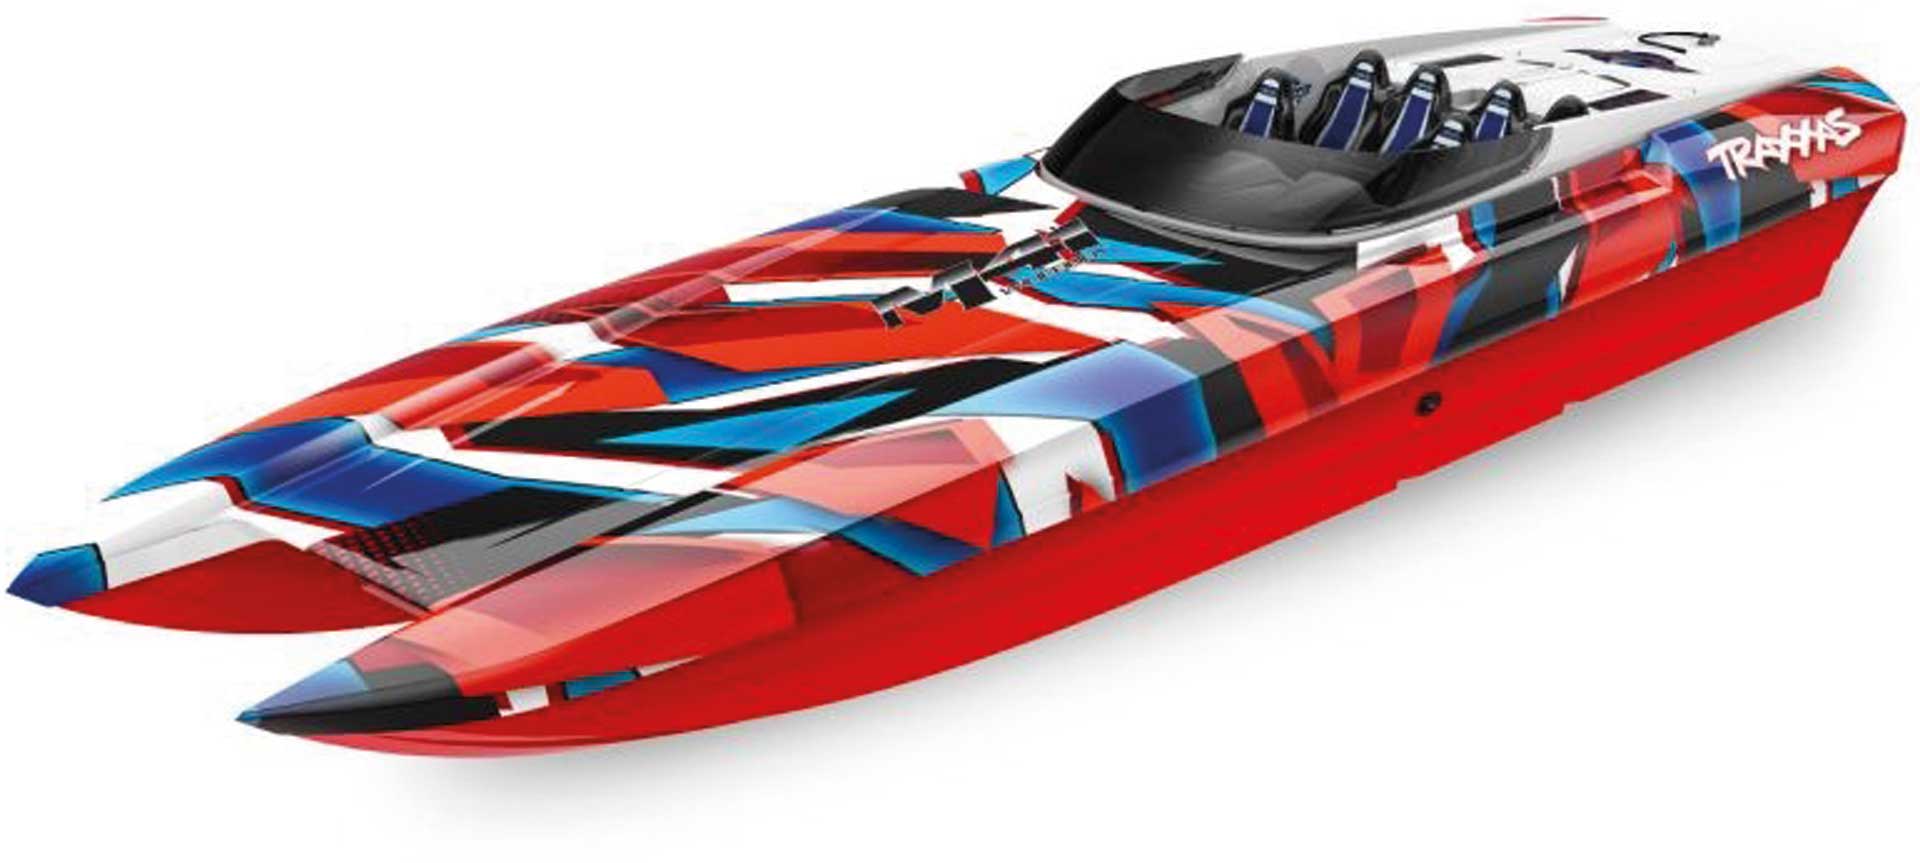 TRAXXAS DCB M41 RED/BLUE 40 INCH WITHOUT BATTERY/CHARGER BL-CATAMARAN-RACING-BOAT BRUSHLESS